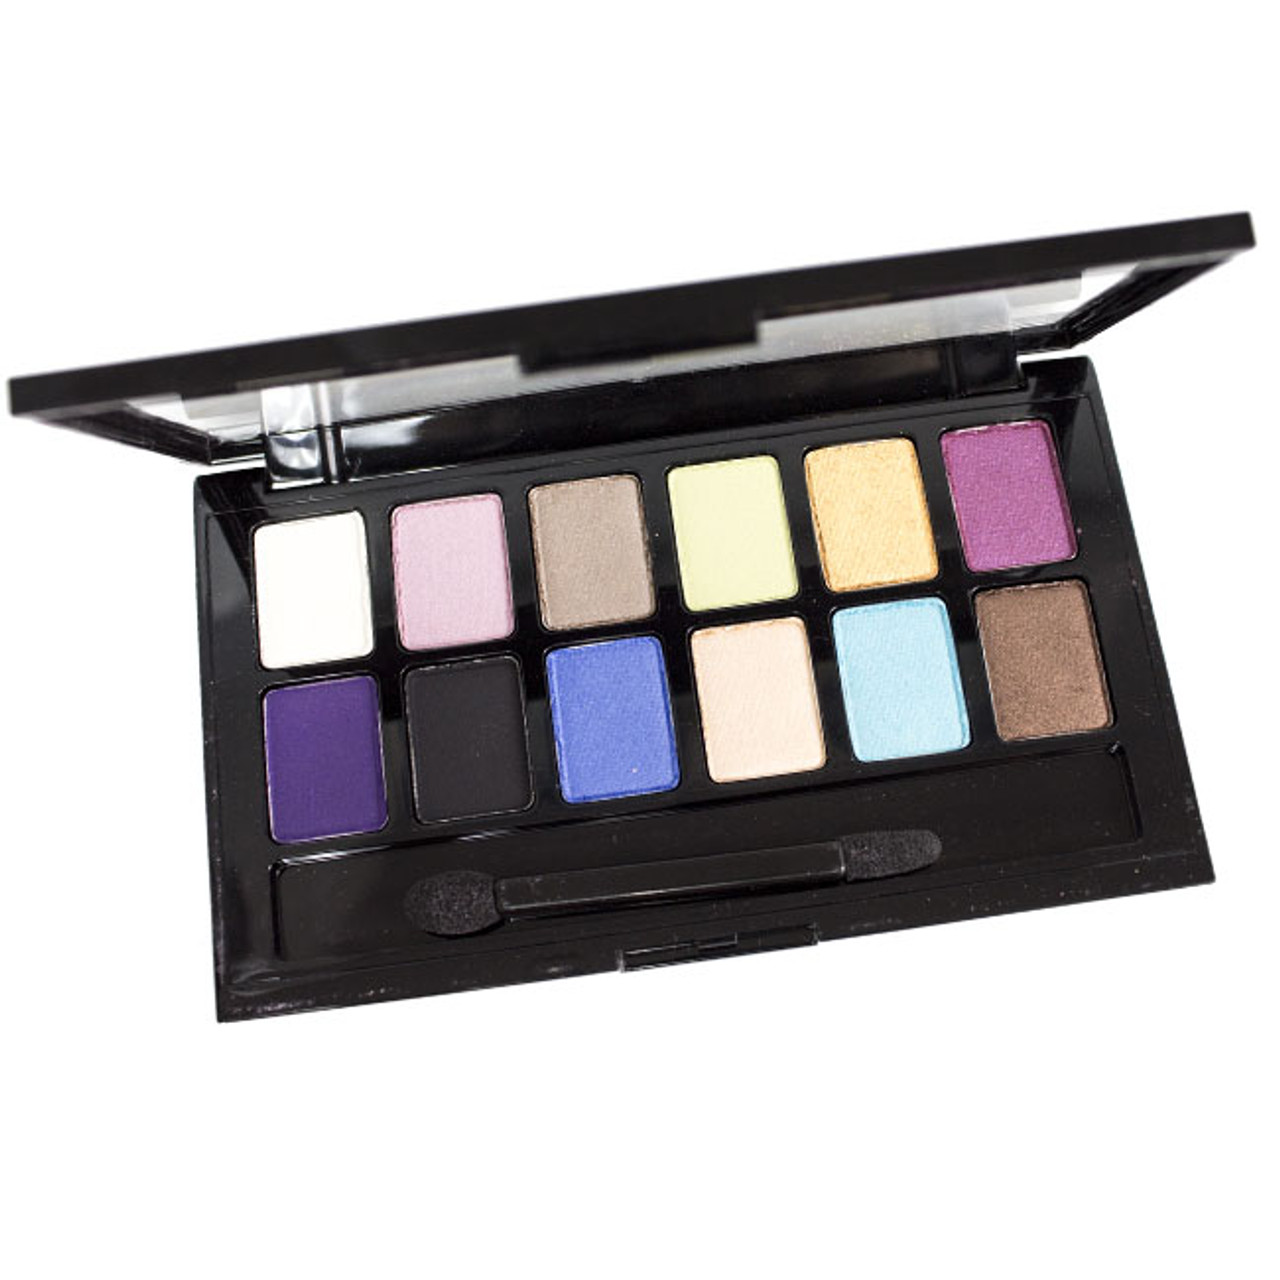 Maybelline 12-Pan Eyeshadow Palette - The Brights - BuyMeBeauty.com